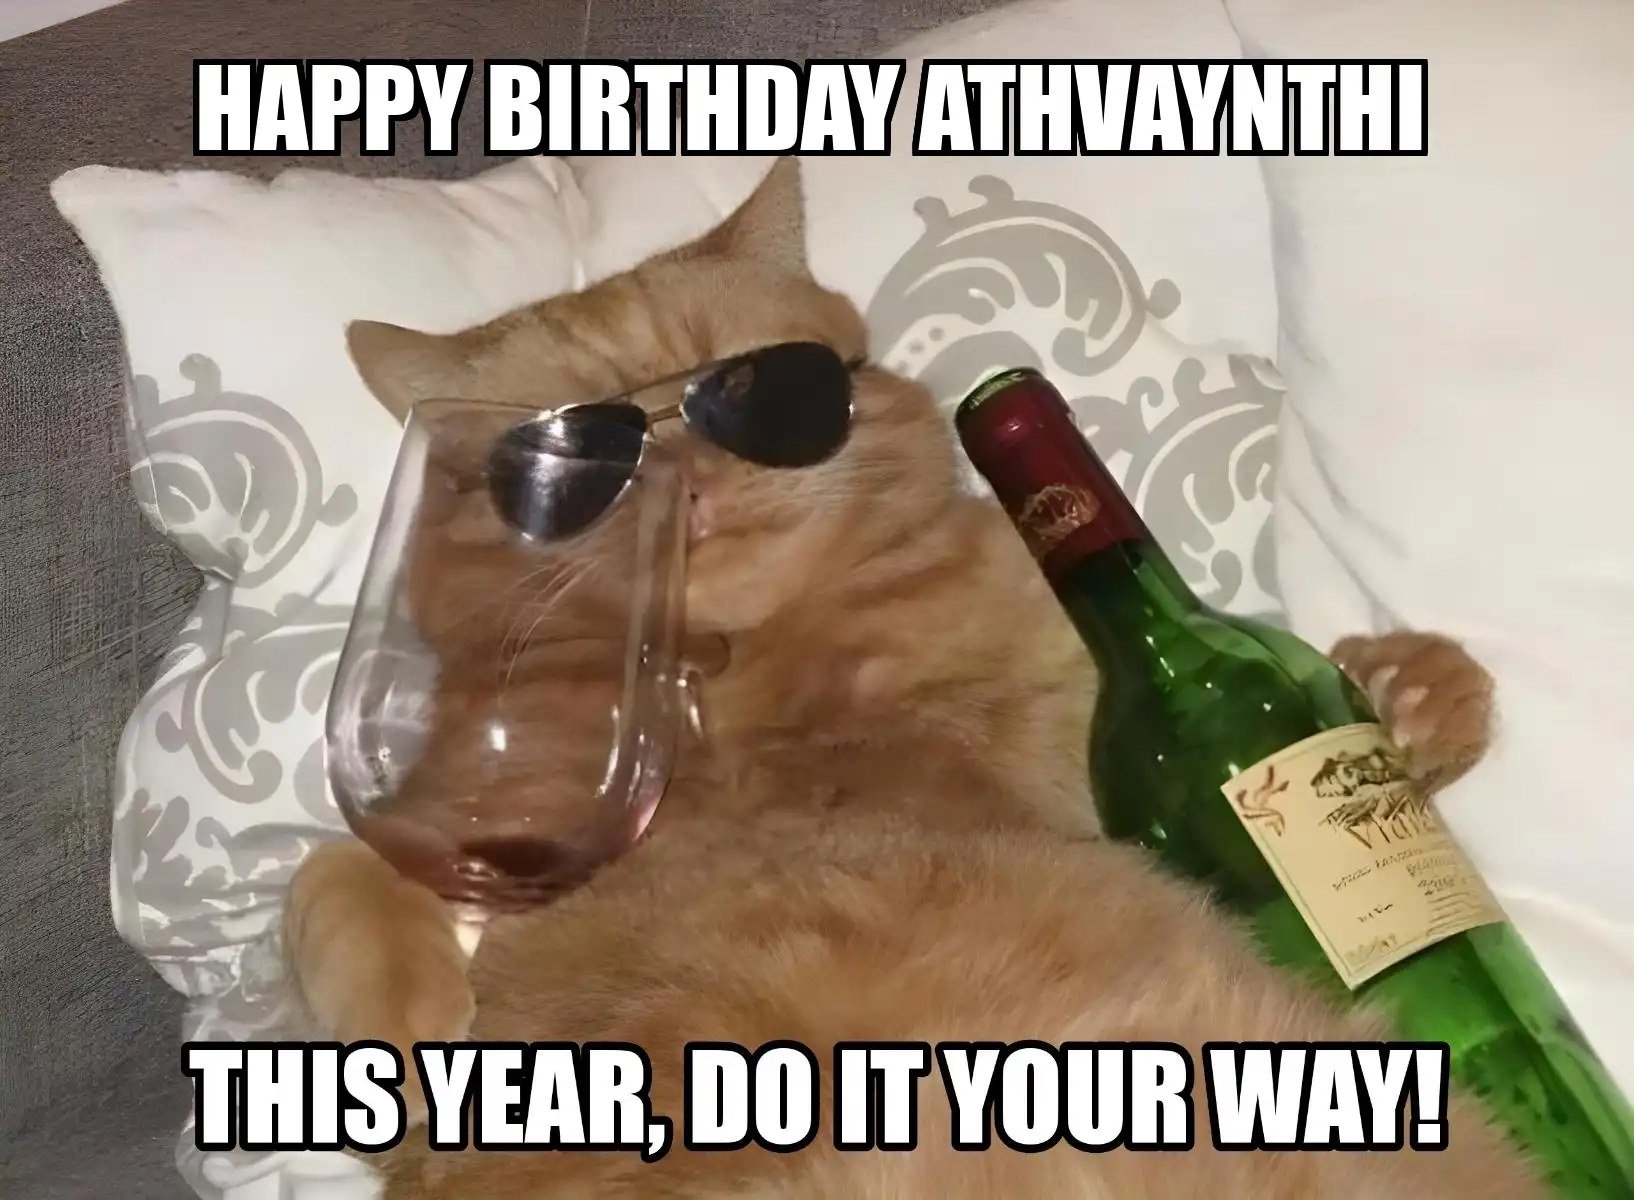 Happy Birthday Athvaynthi This Year Do It Your Way Meme